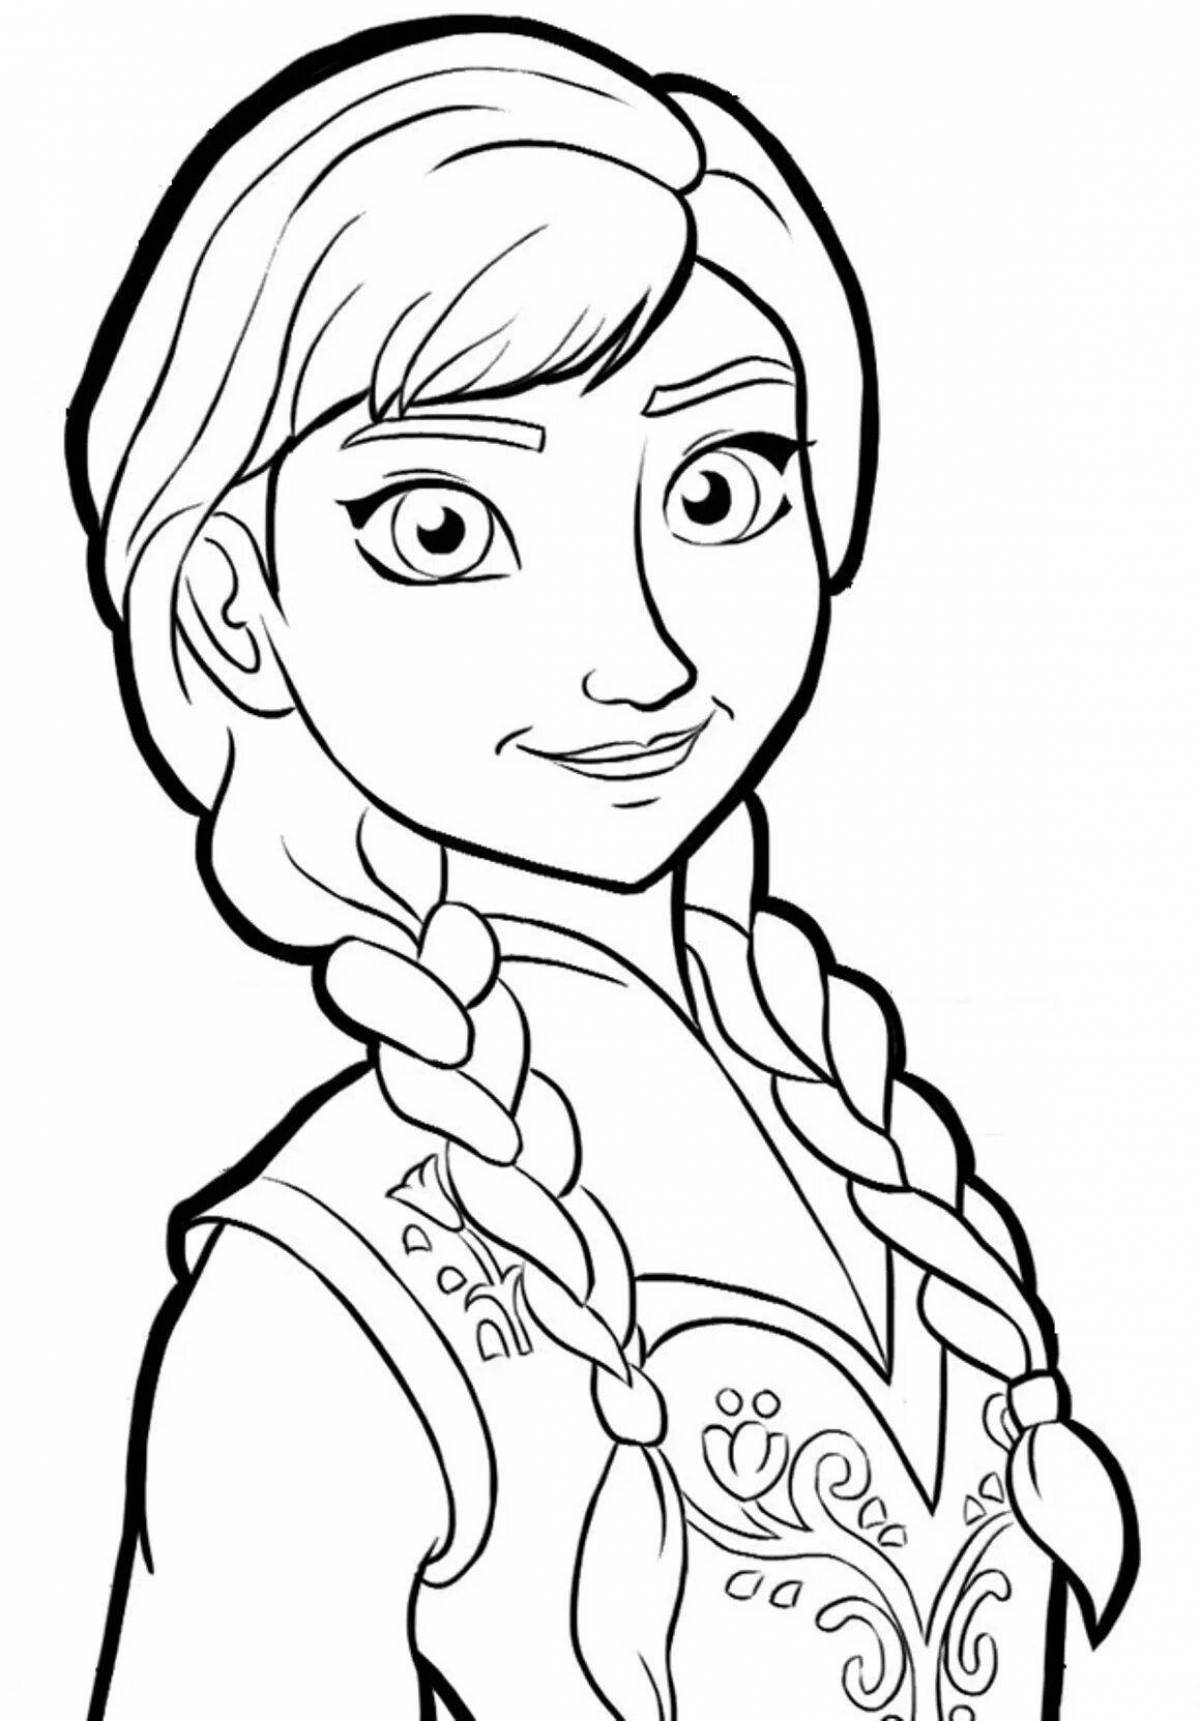 Anna's radiant coloring for children